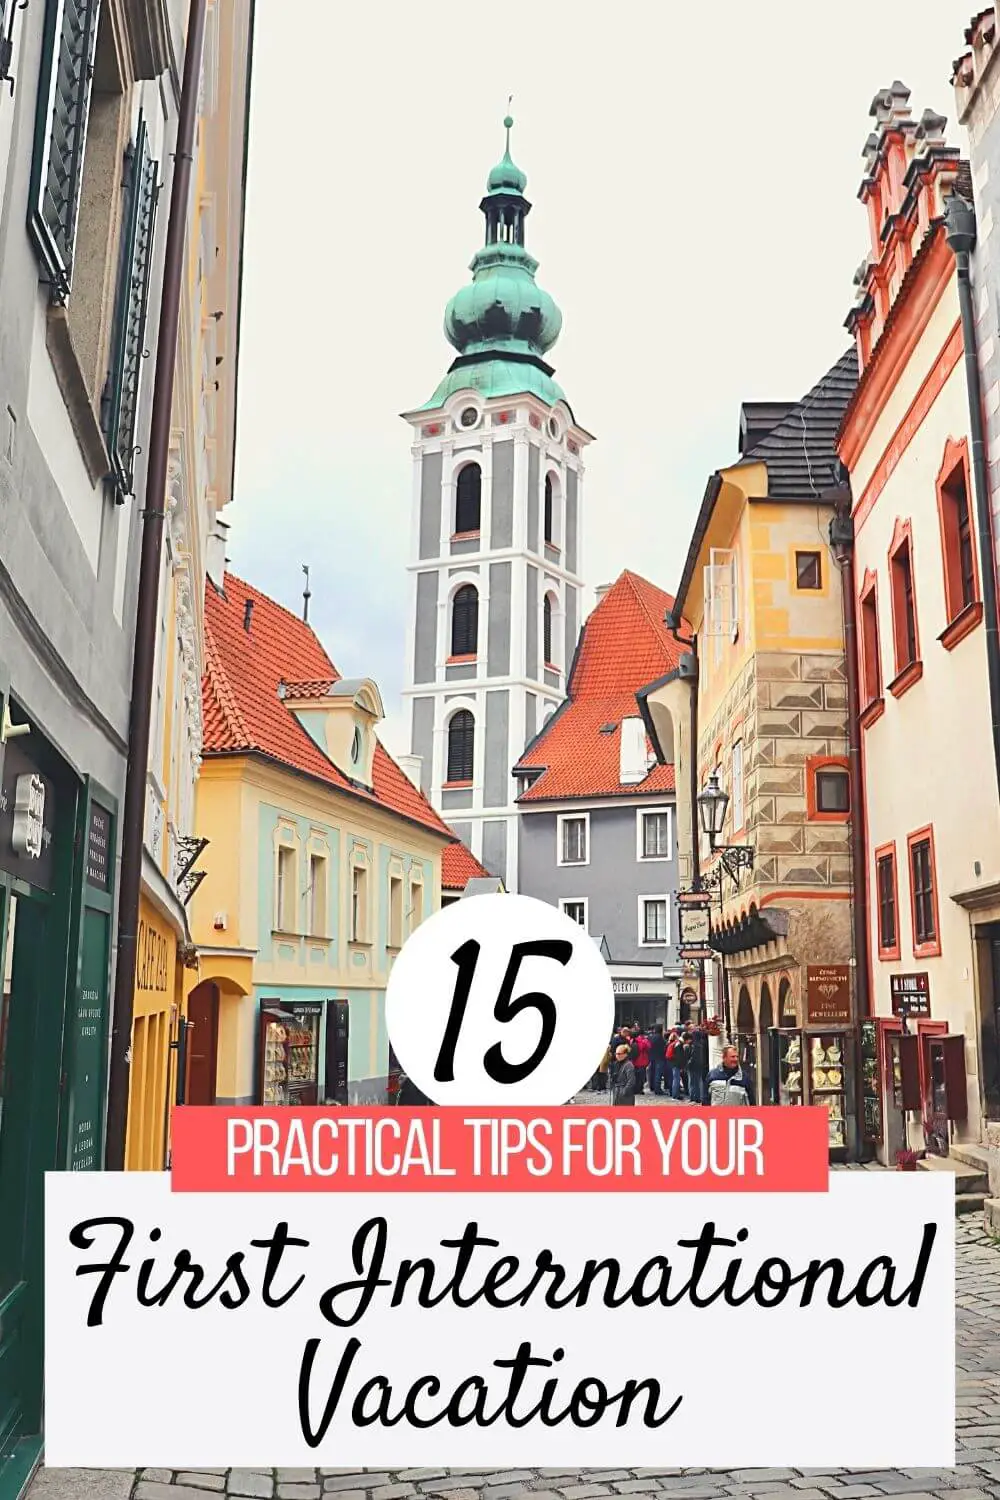 15 Practical Tips for Your First International Vacation